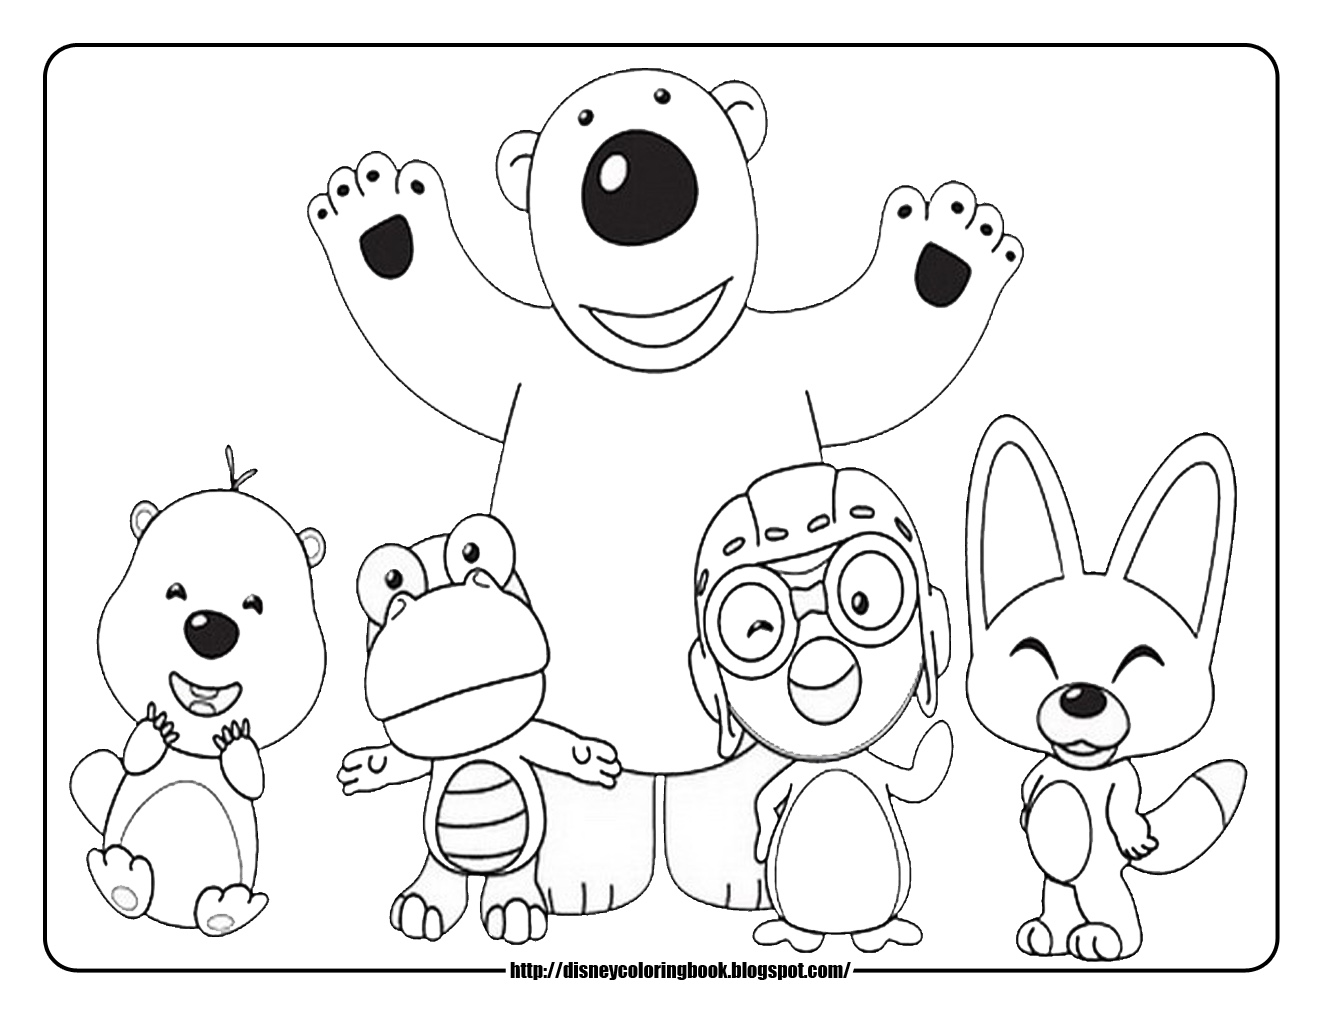 Disney Coloring Pages and Sheets for Kids: Pororo the Little Penguin